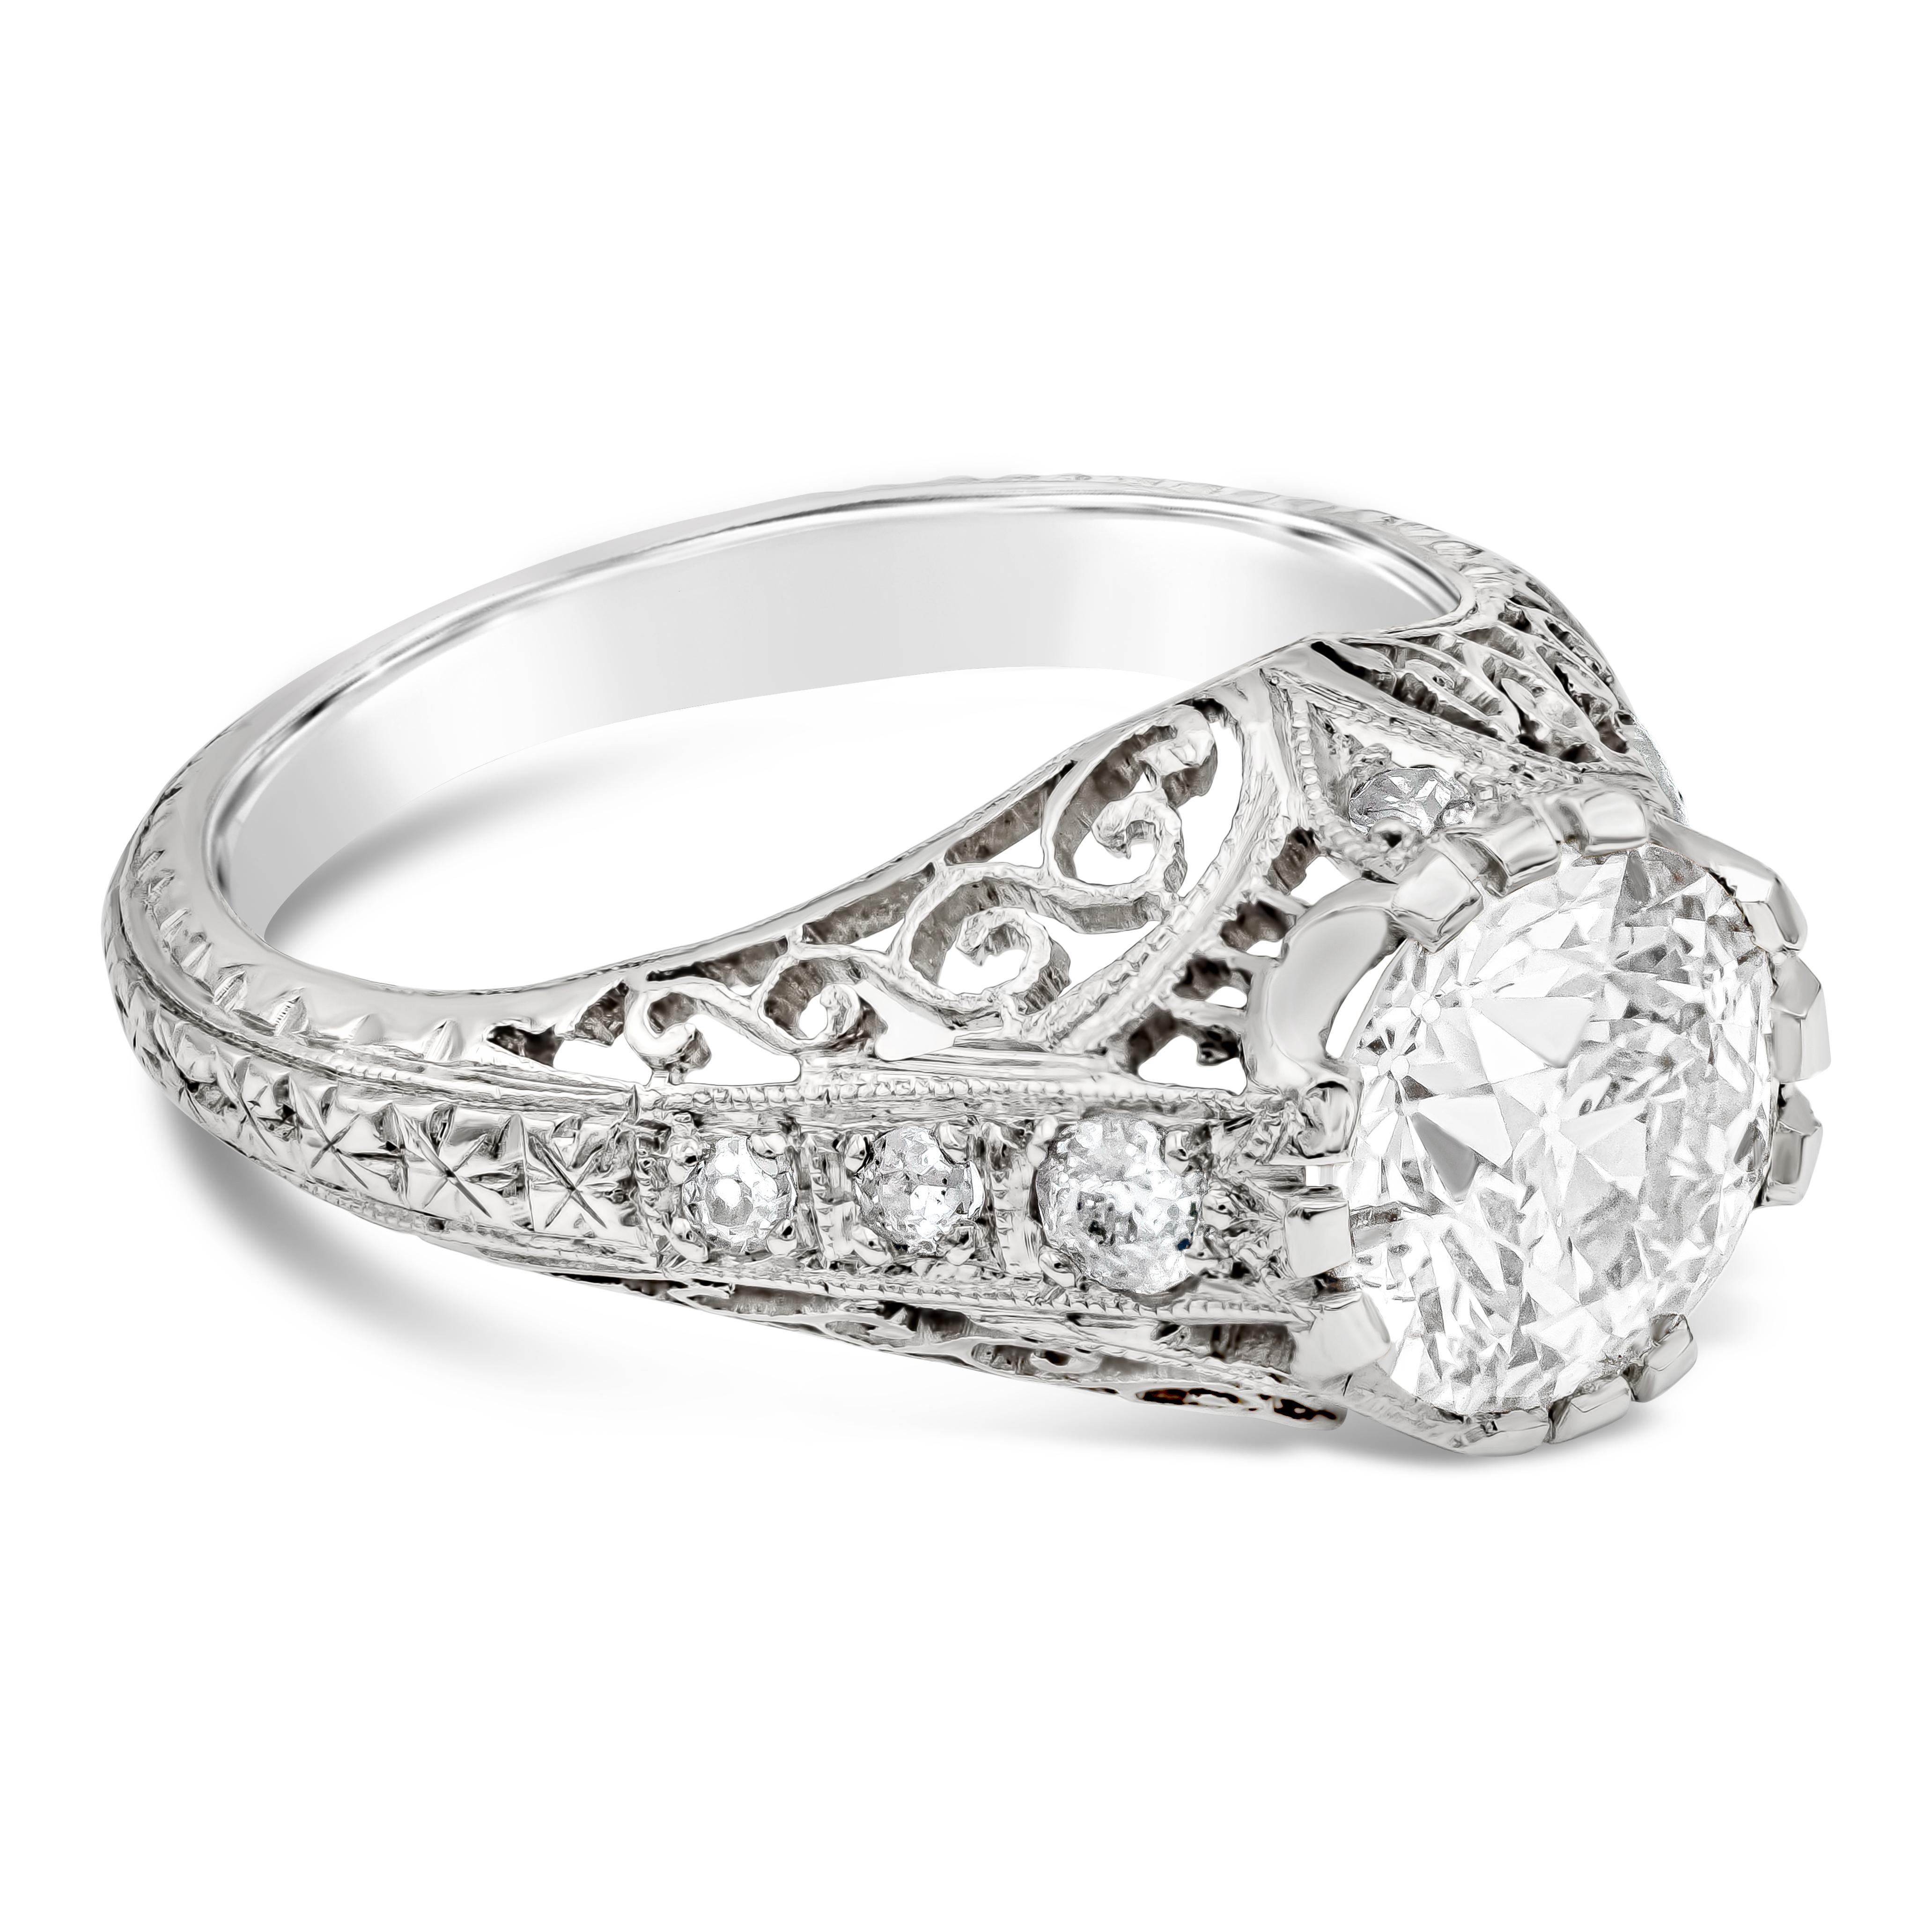 This gorgeous ring is from the art deco period and showcases a 1.61 carat Old European Cut diamond center. Set in an intricate design made from old world craftsmanship and techniques. Accented by 4 diamonds on each side. Size 5.75 US.

 